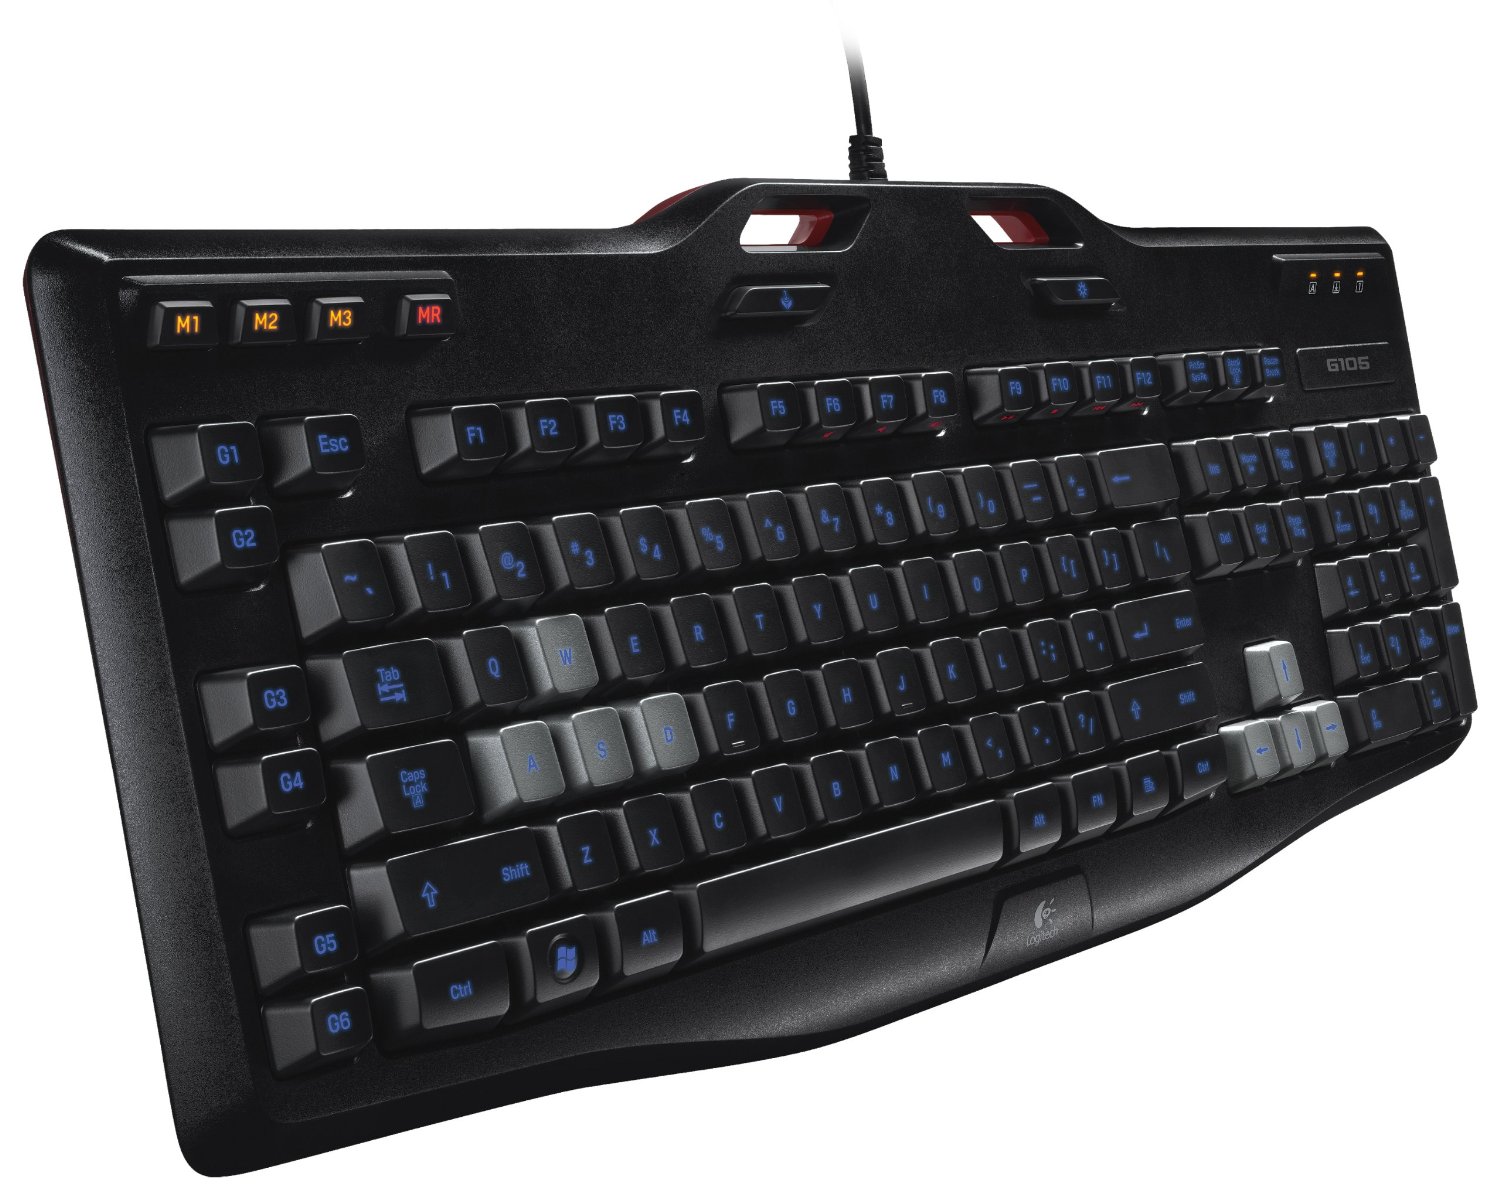 Wrap Støt opladning Logitech G105 Review - Membrane Gaming Keyboard | Tom's Guide